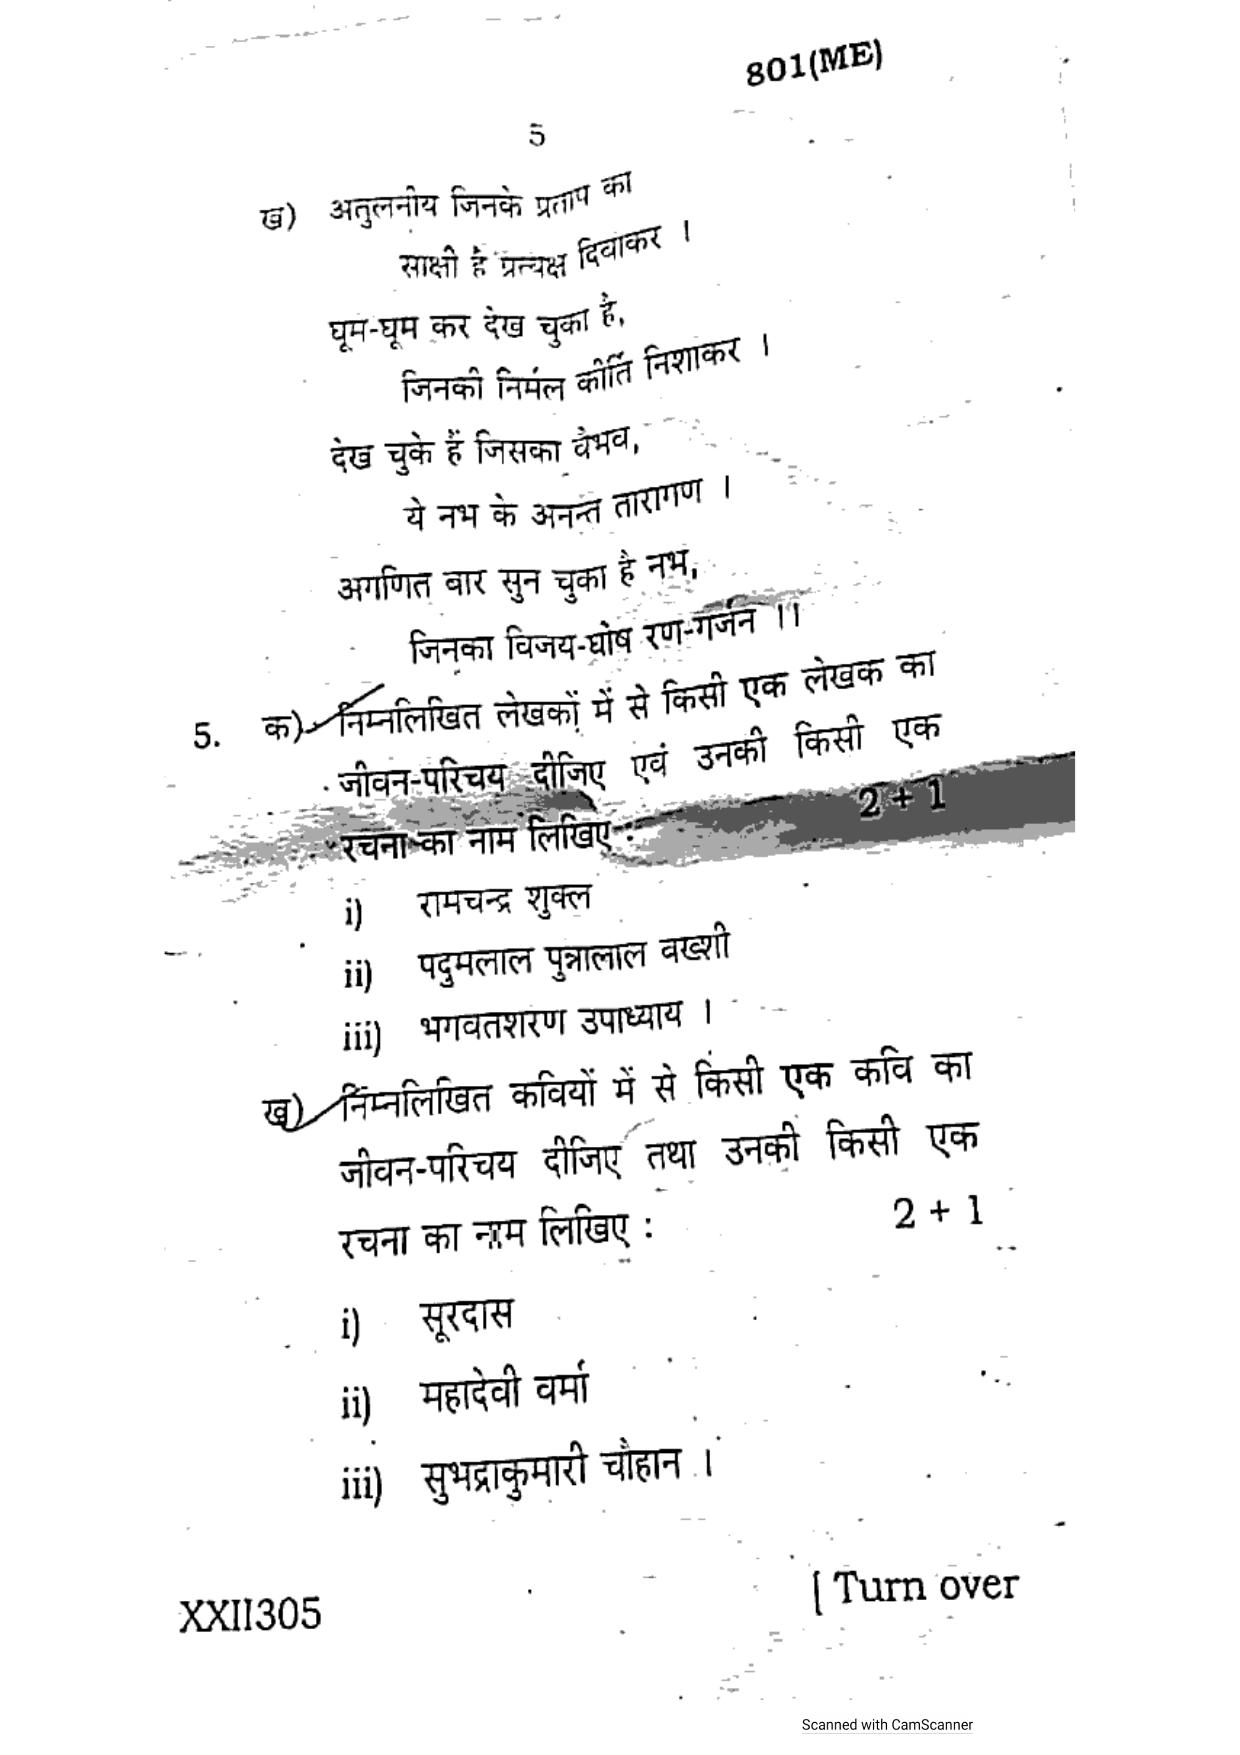 UP Board Previous Year Question Paper Class 10 Hindi (801 ME) – 2020 - Page 5